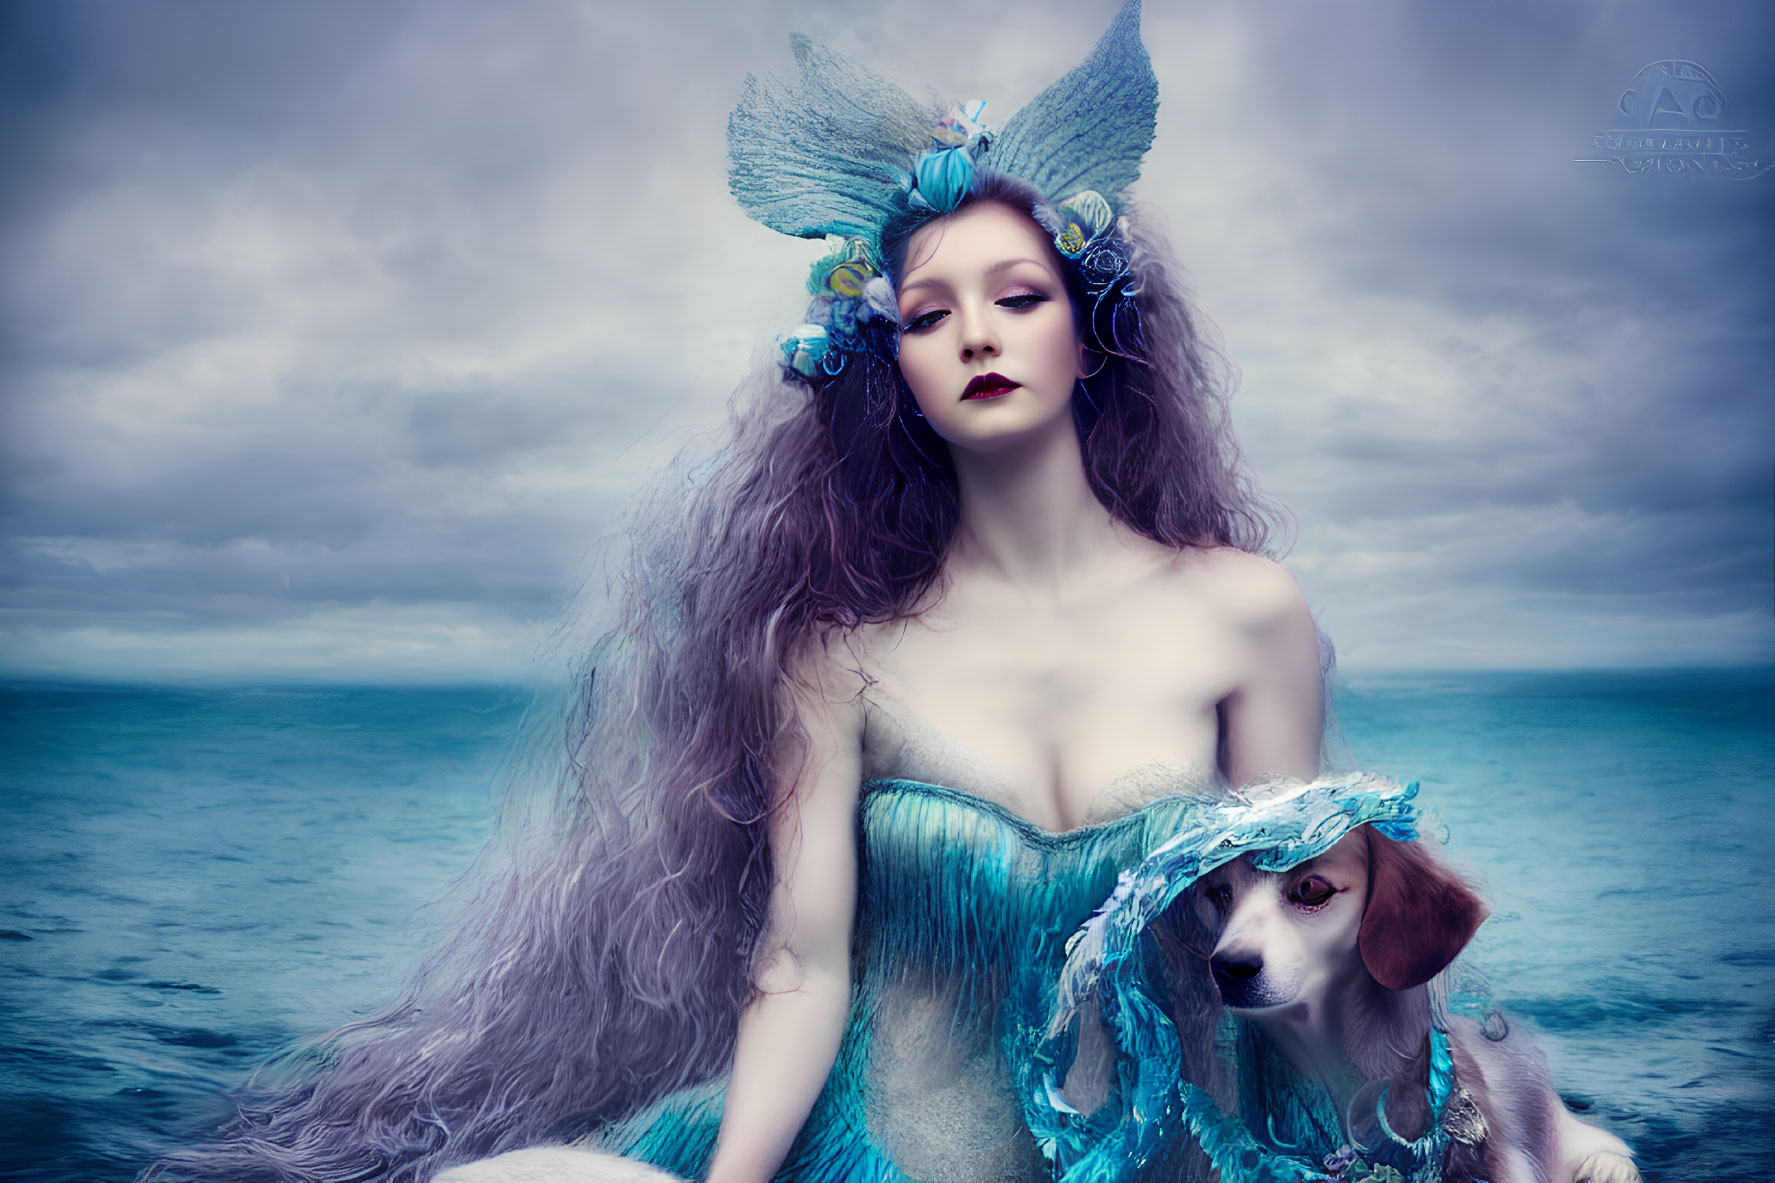 Elaborate Fantasy Makeup and Costume with Dog on Dramatic Ocean Backdrop